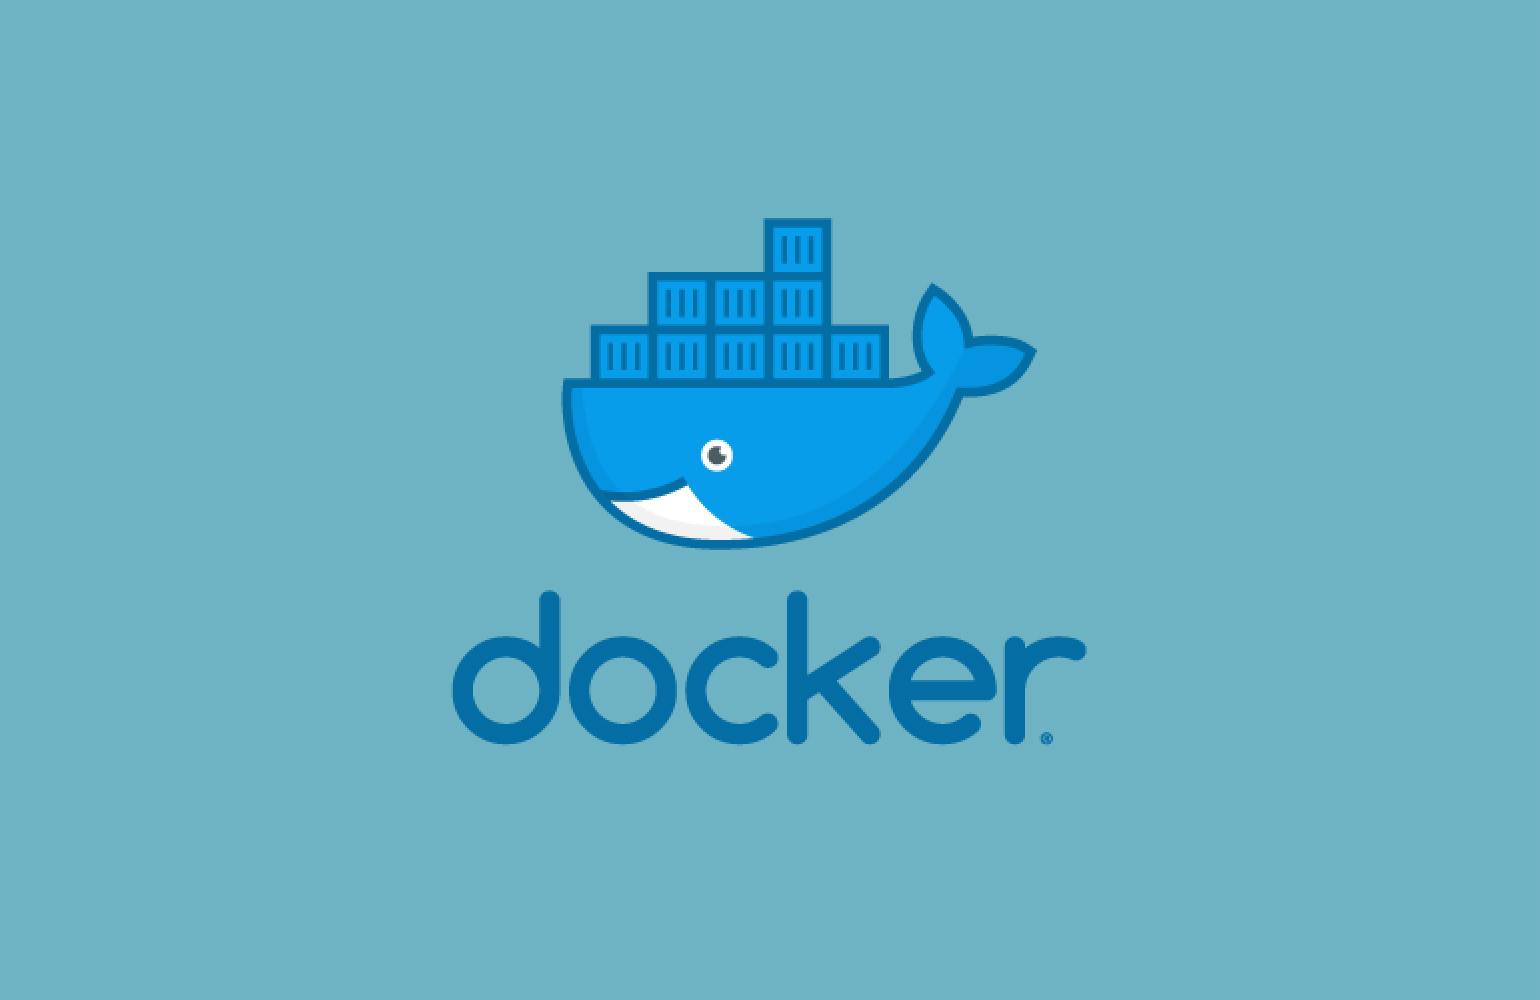 How to close attack vectors for exposed secrets in Docker